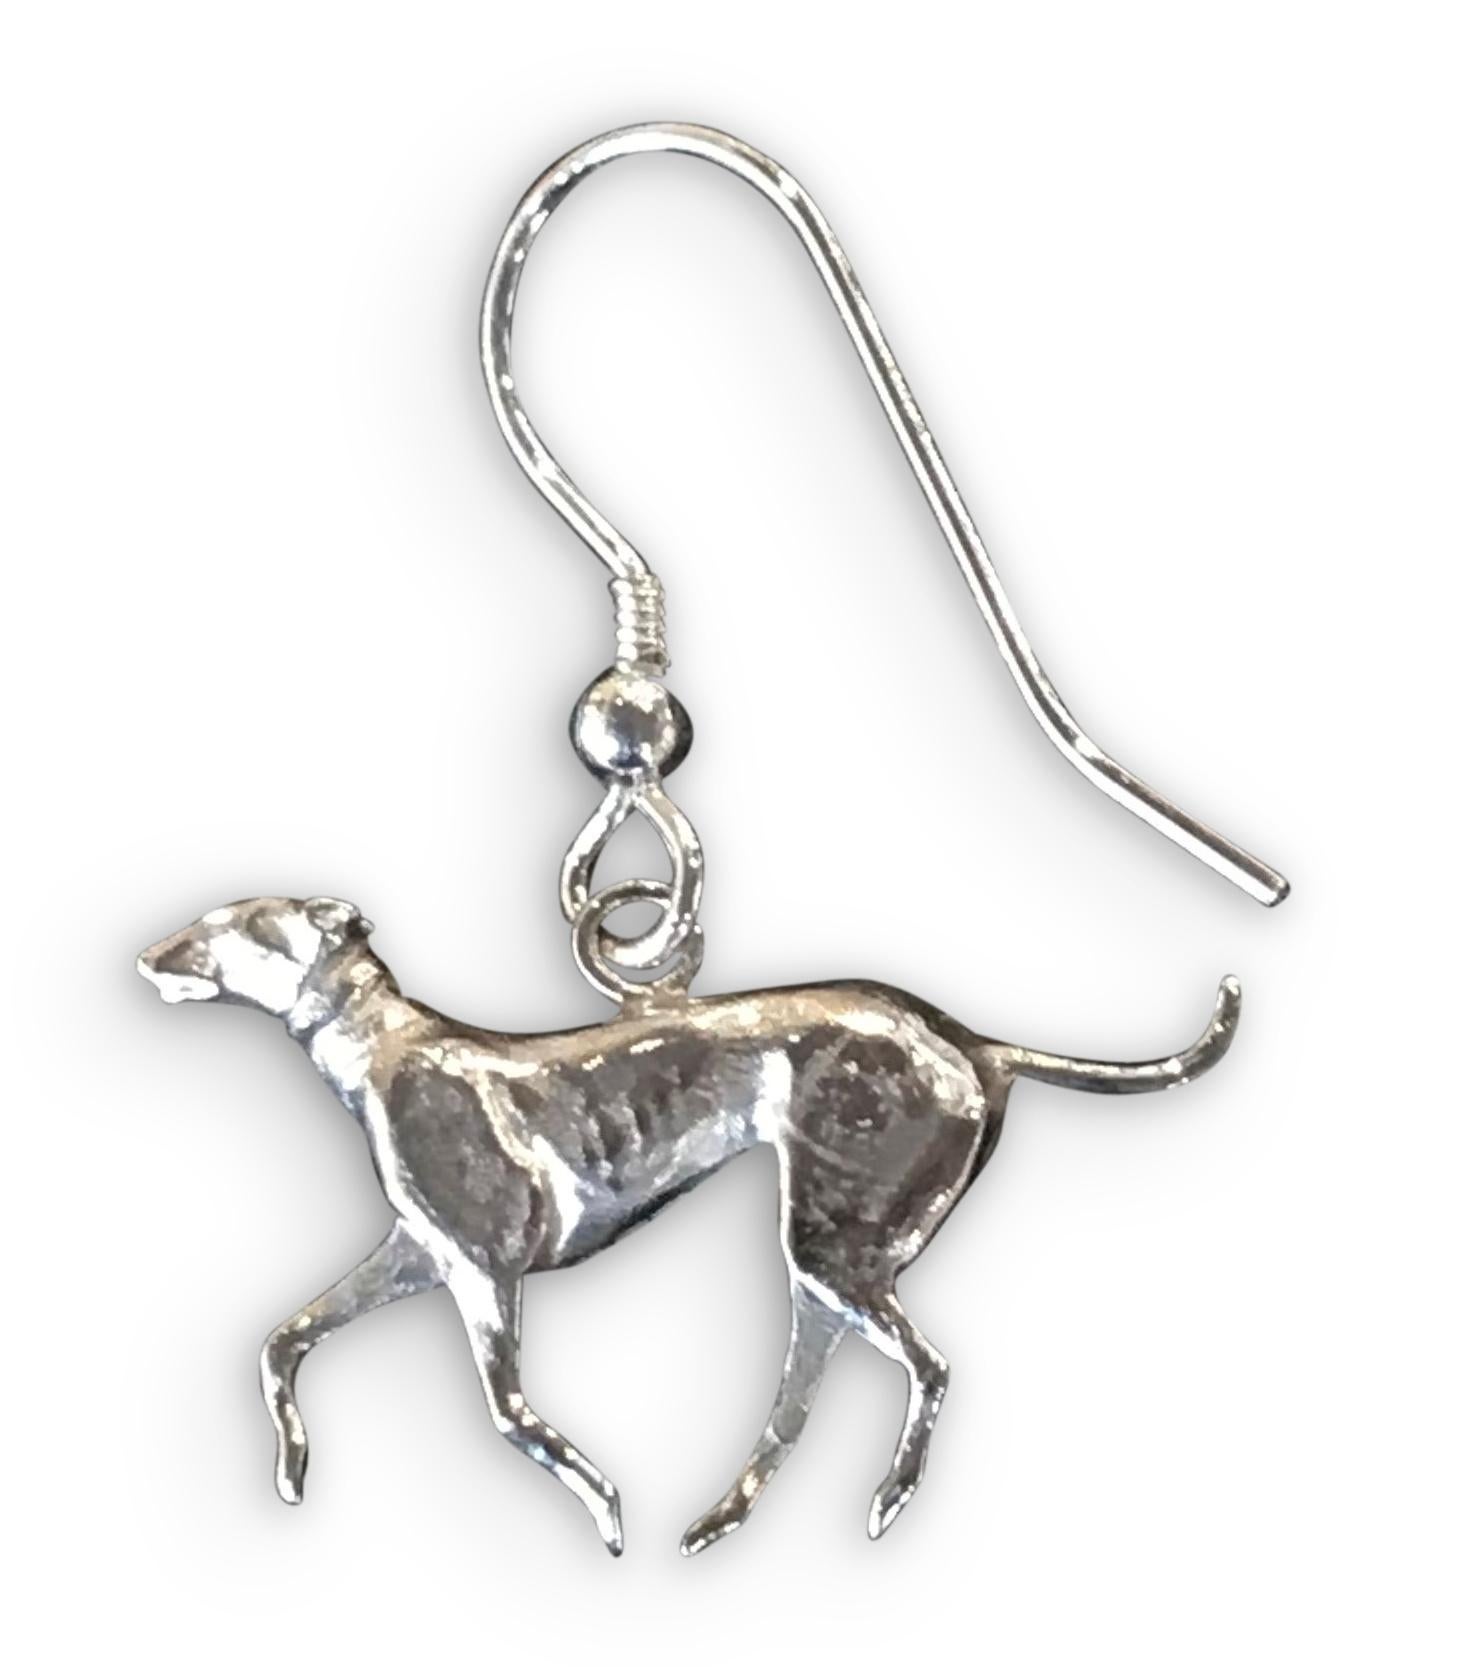 Artisan Paul Eaton Sculpted Flat Sterling Silver Greyhound Earrings For Sale